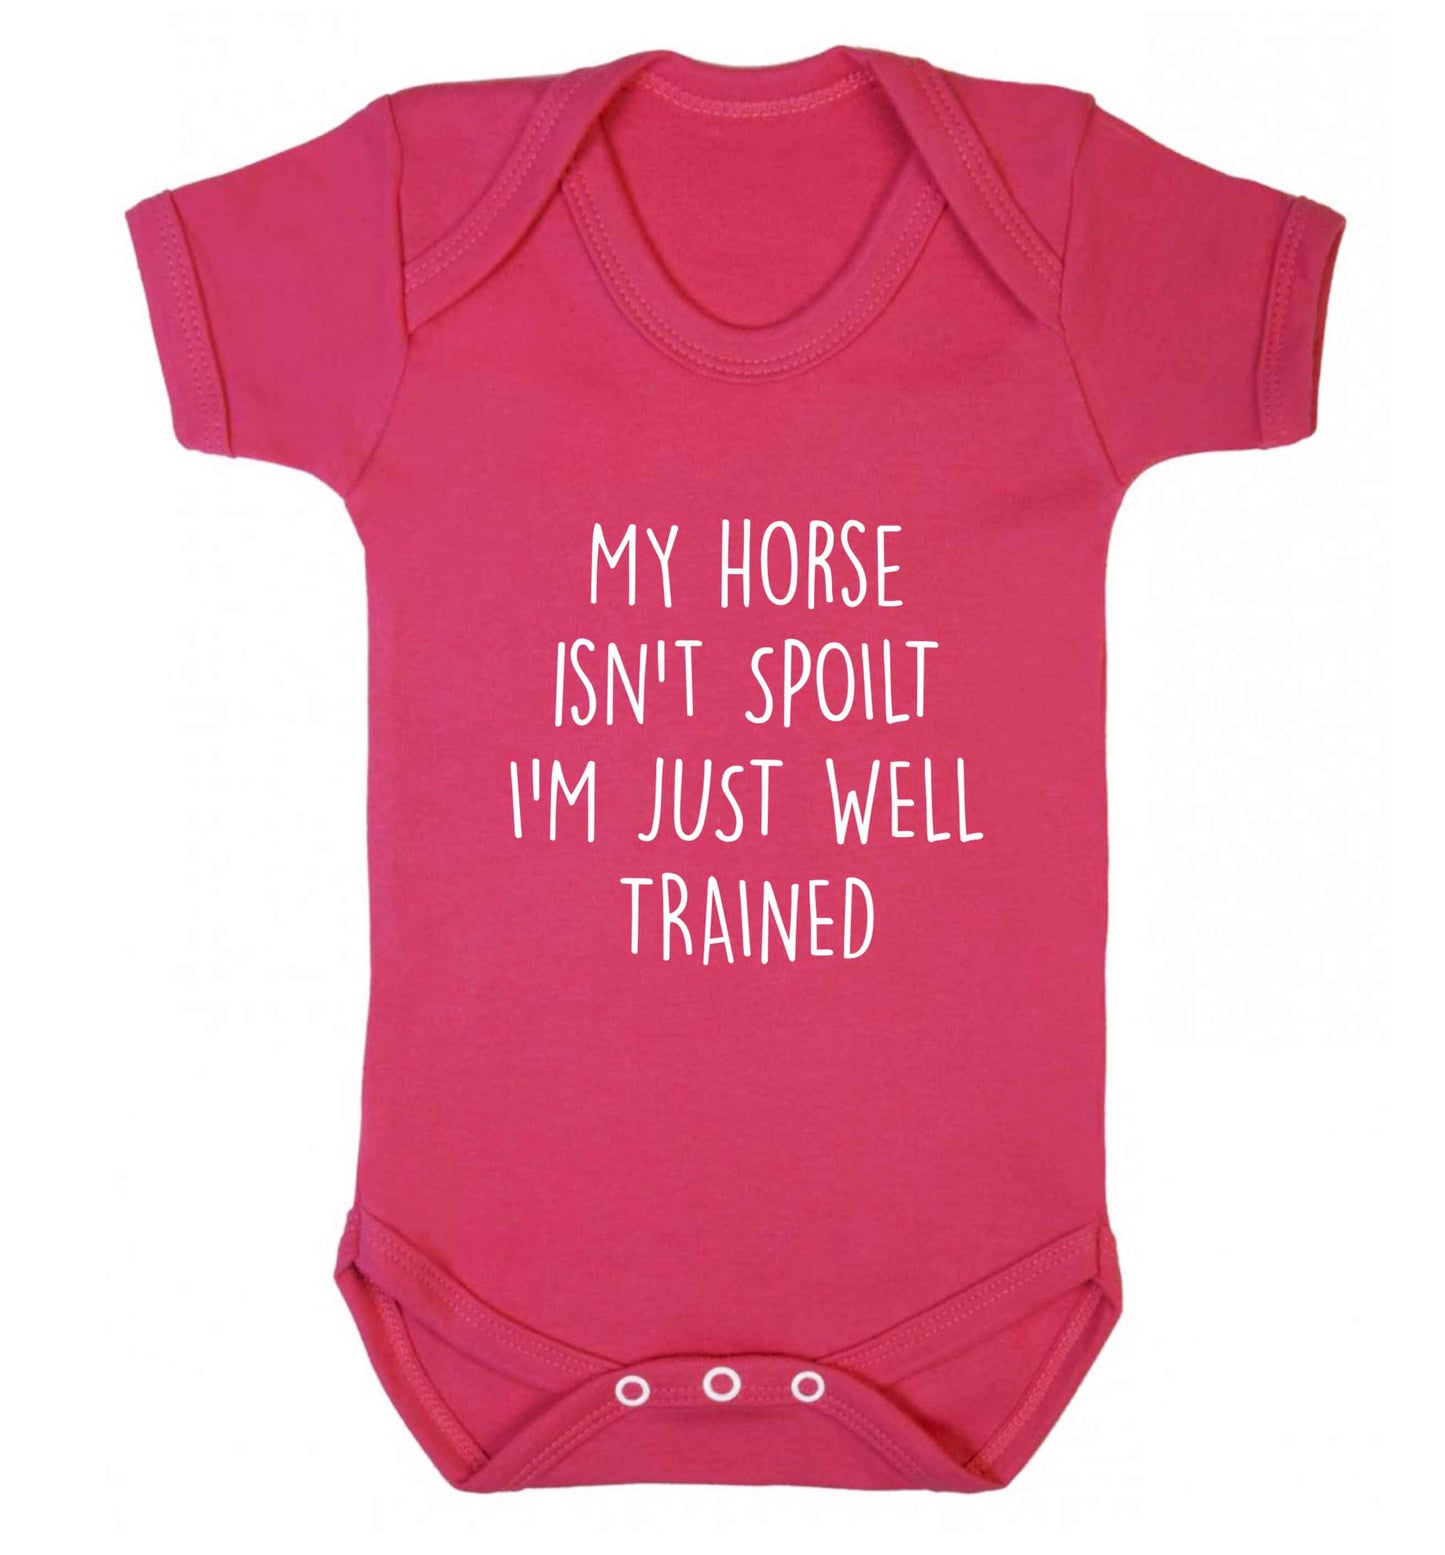 My horse isn't spoilt I'm just well trained baby vest dark pink 18-24 months